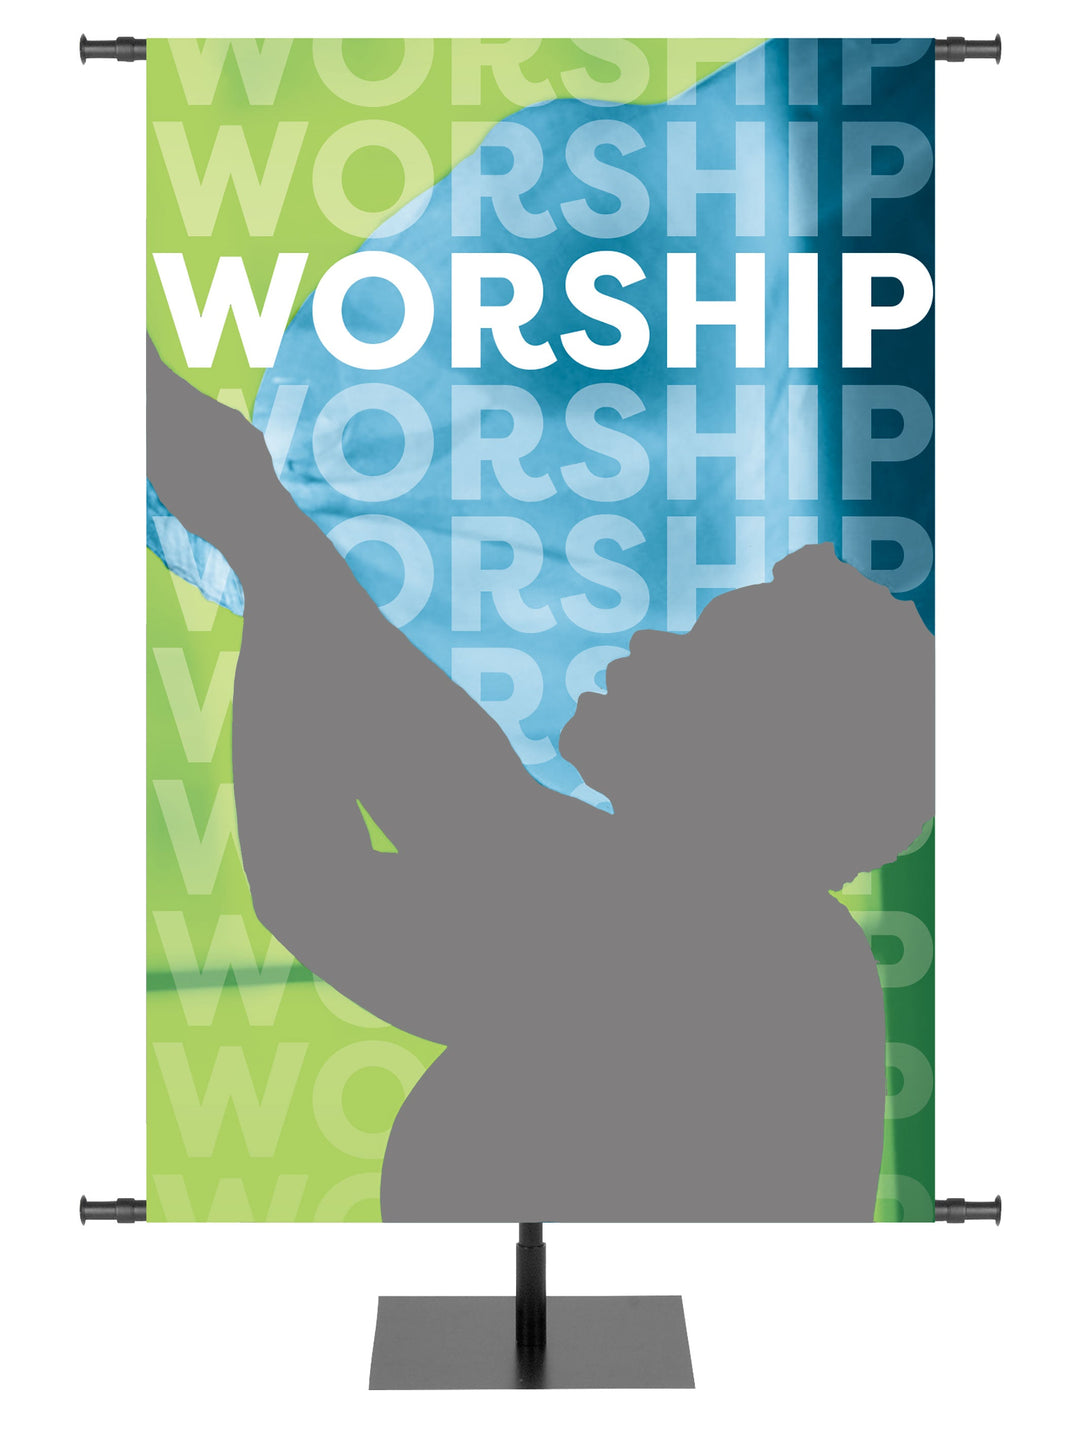 Custom Church Banner Community of Faith featuring worshiper with arms outstretched toward heaven. Customize with images of members of your community.